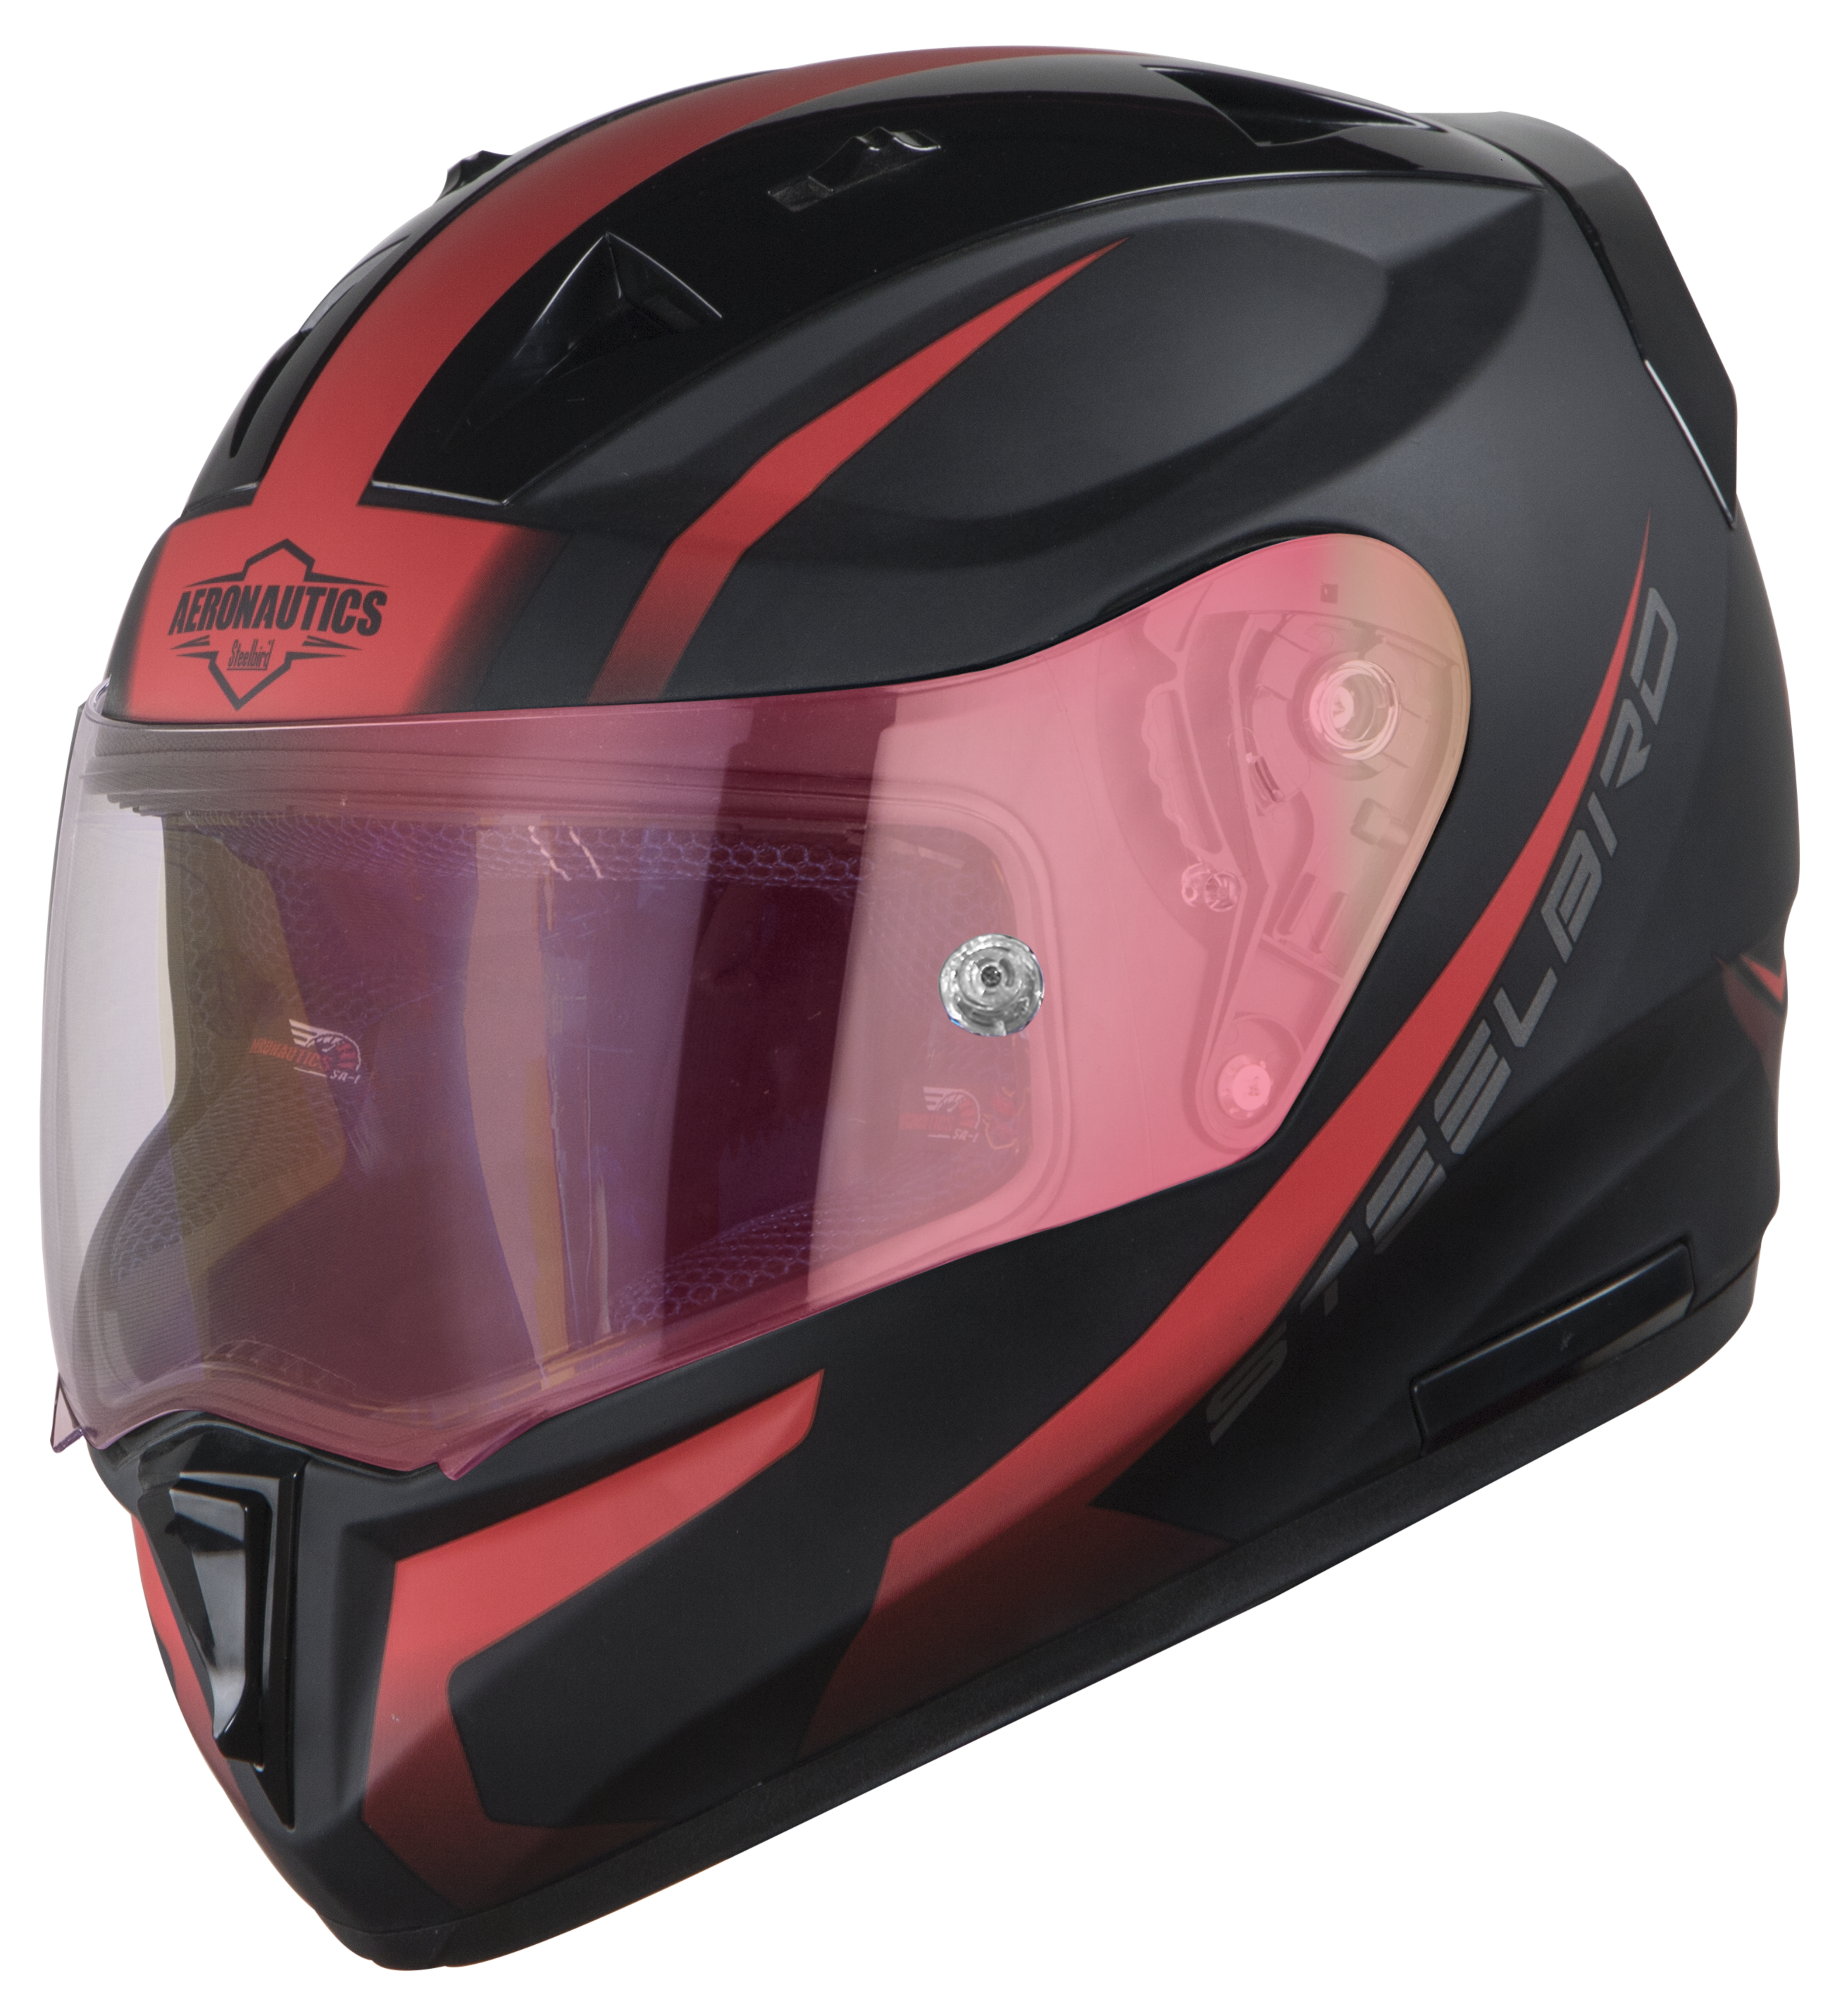 SA-1 WHIF Mat Black/Red (Fitted With Clear Visor Extra Anti-Fog Shield Night Vision Gold Visor Free)